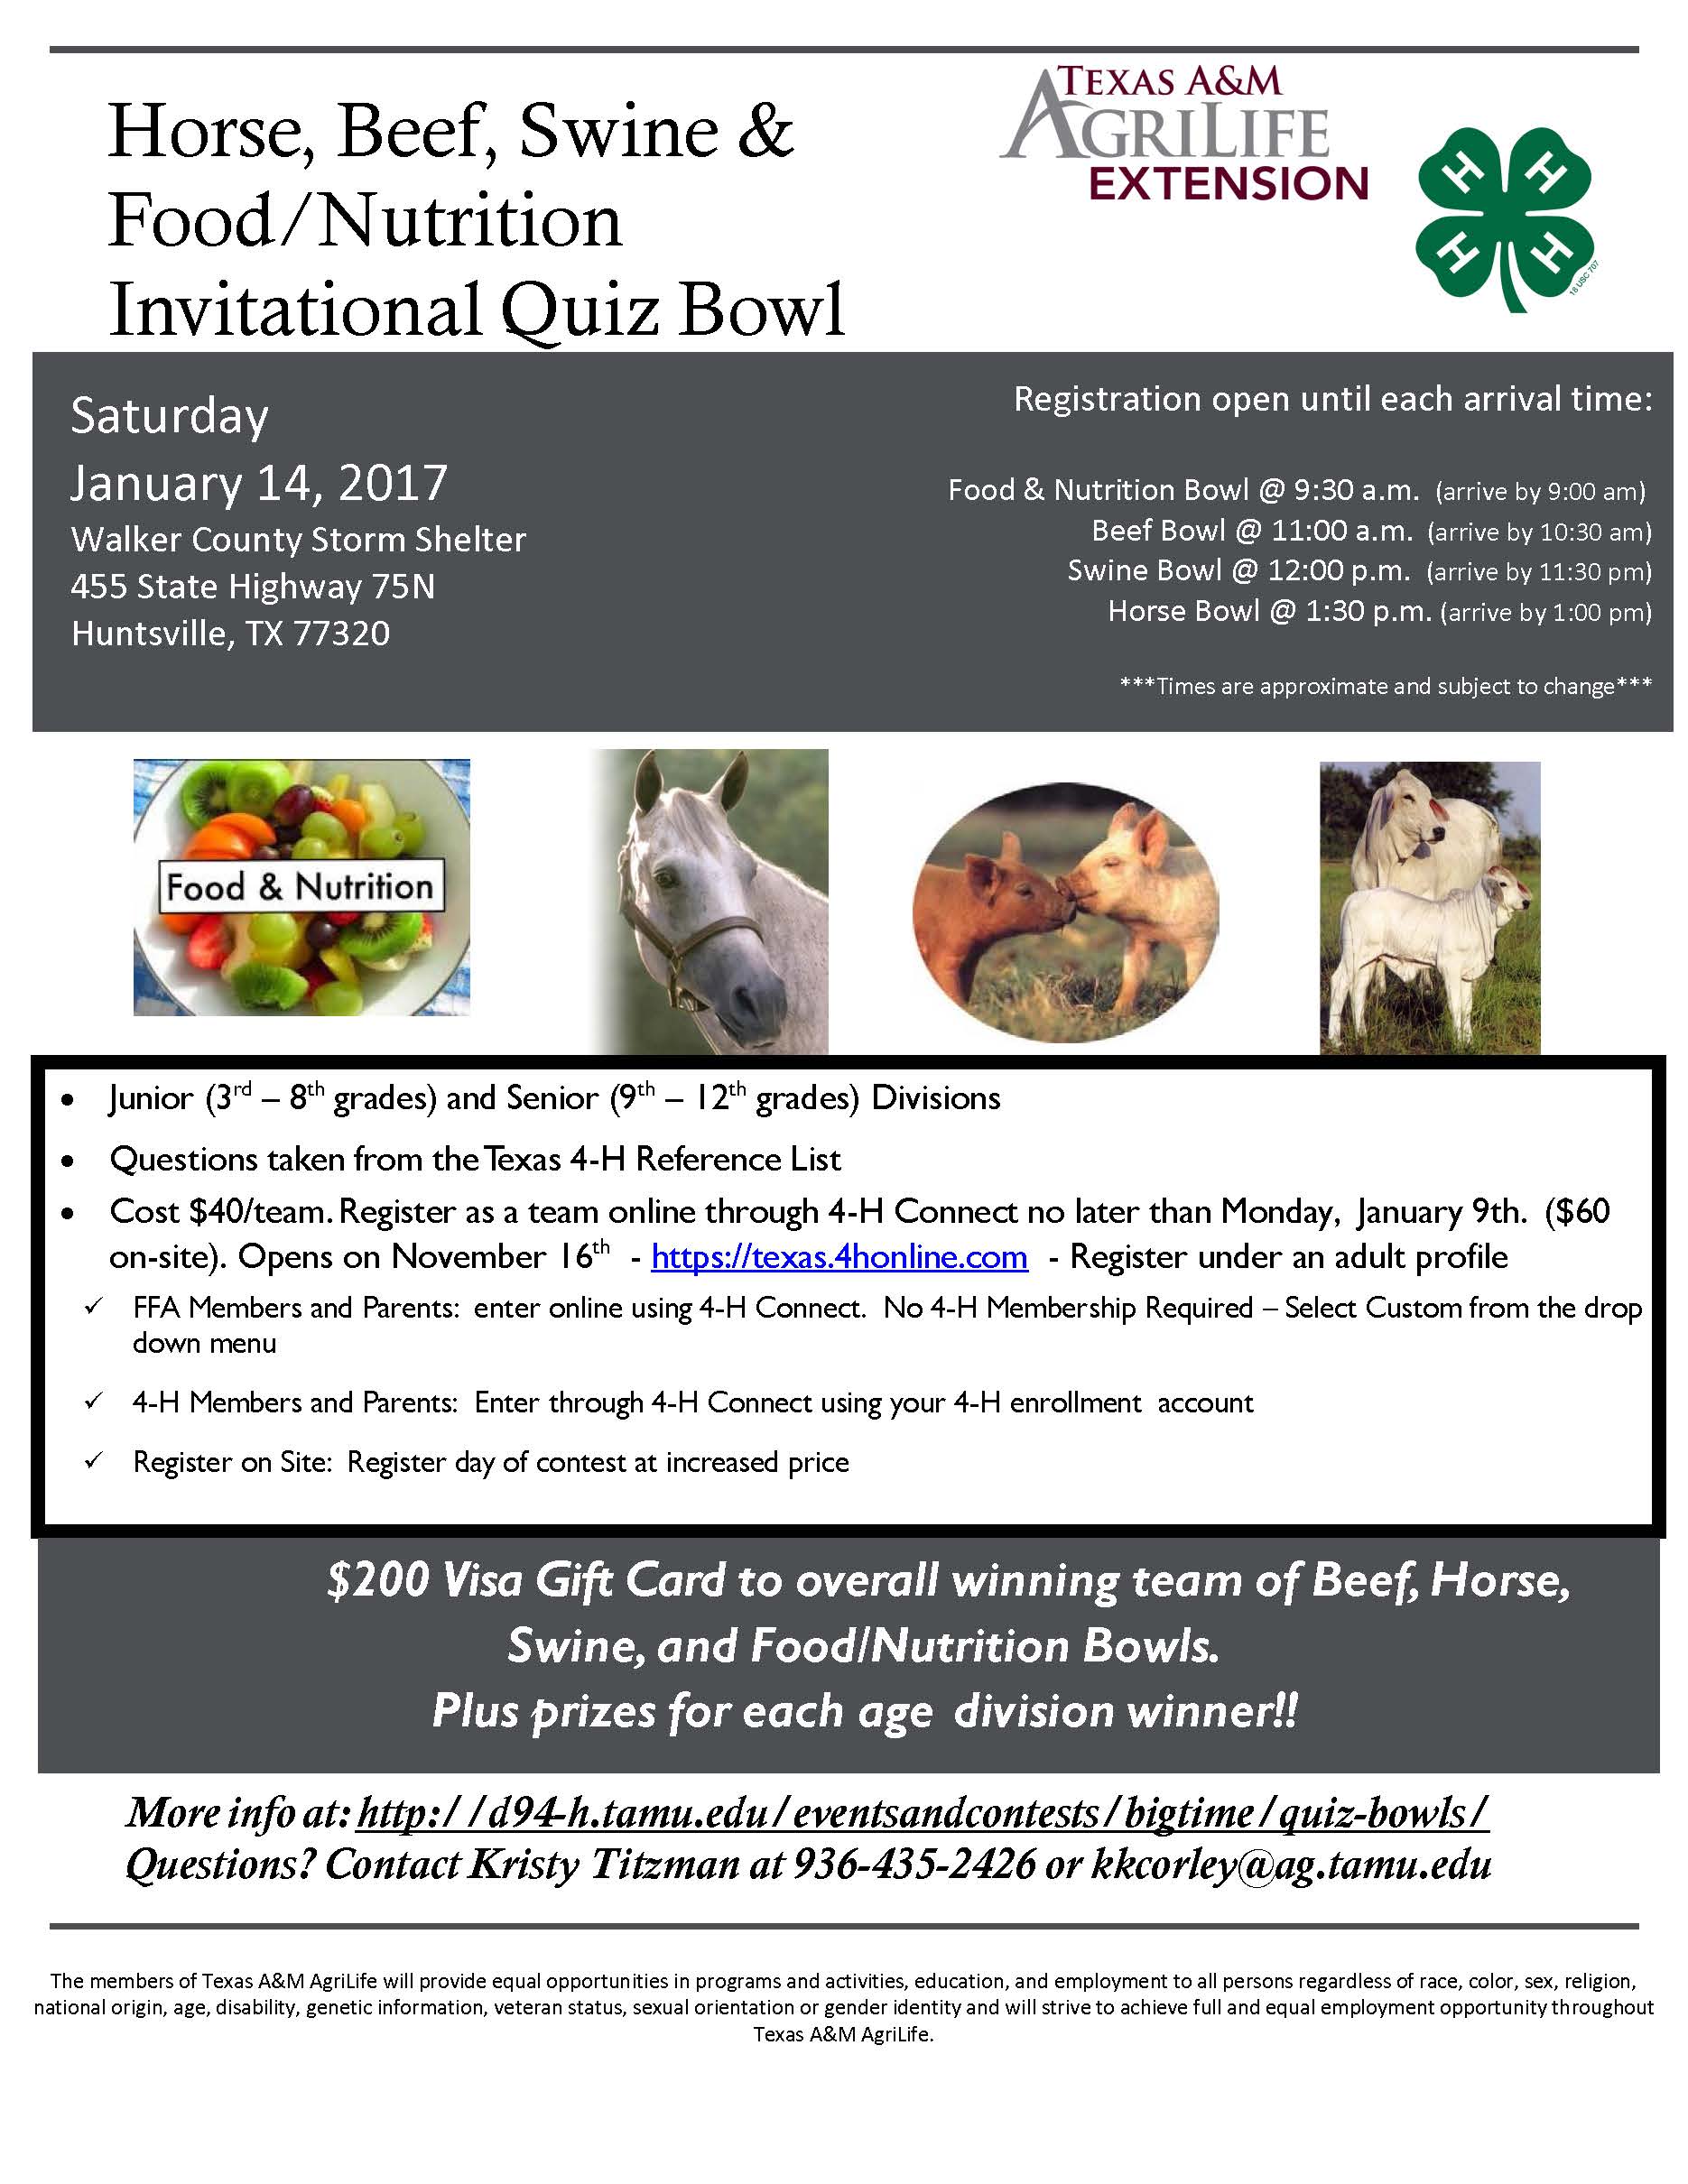 Open quiz bowl contest for Horse, Beef, Swine & Food/Nutrition contestants